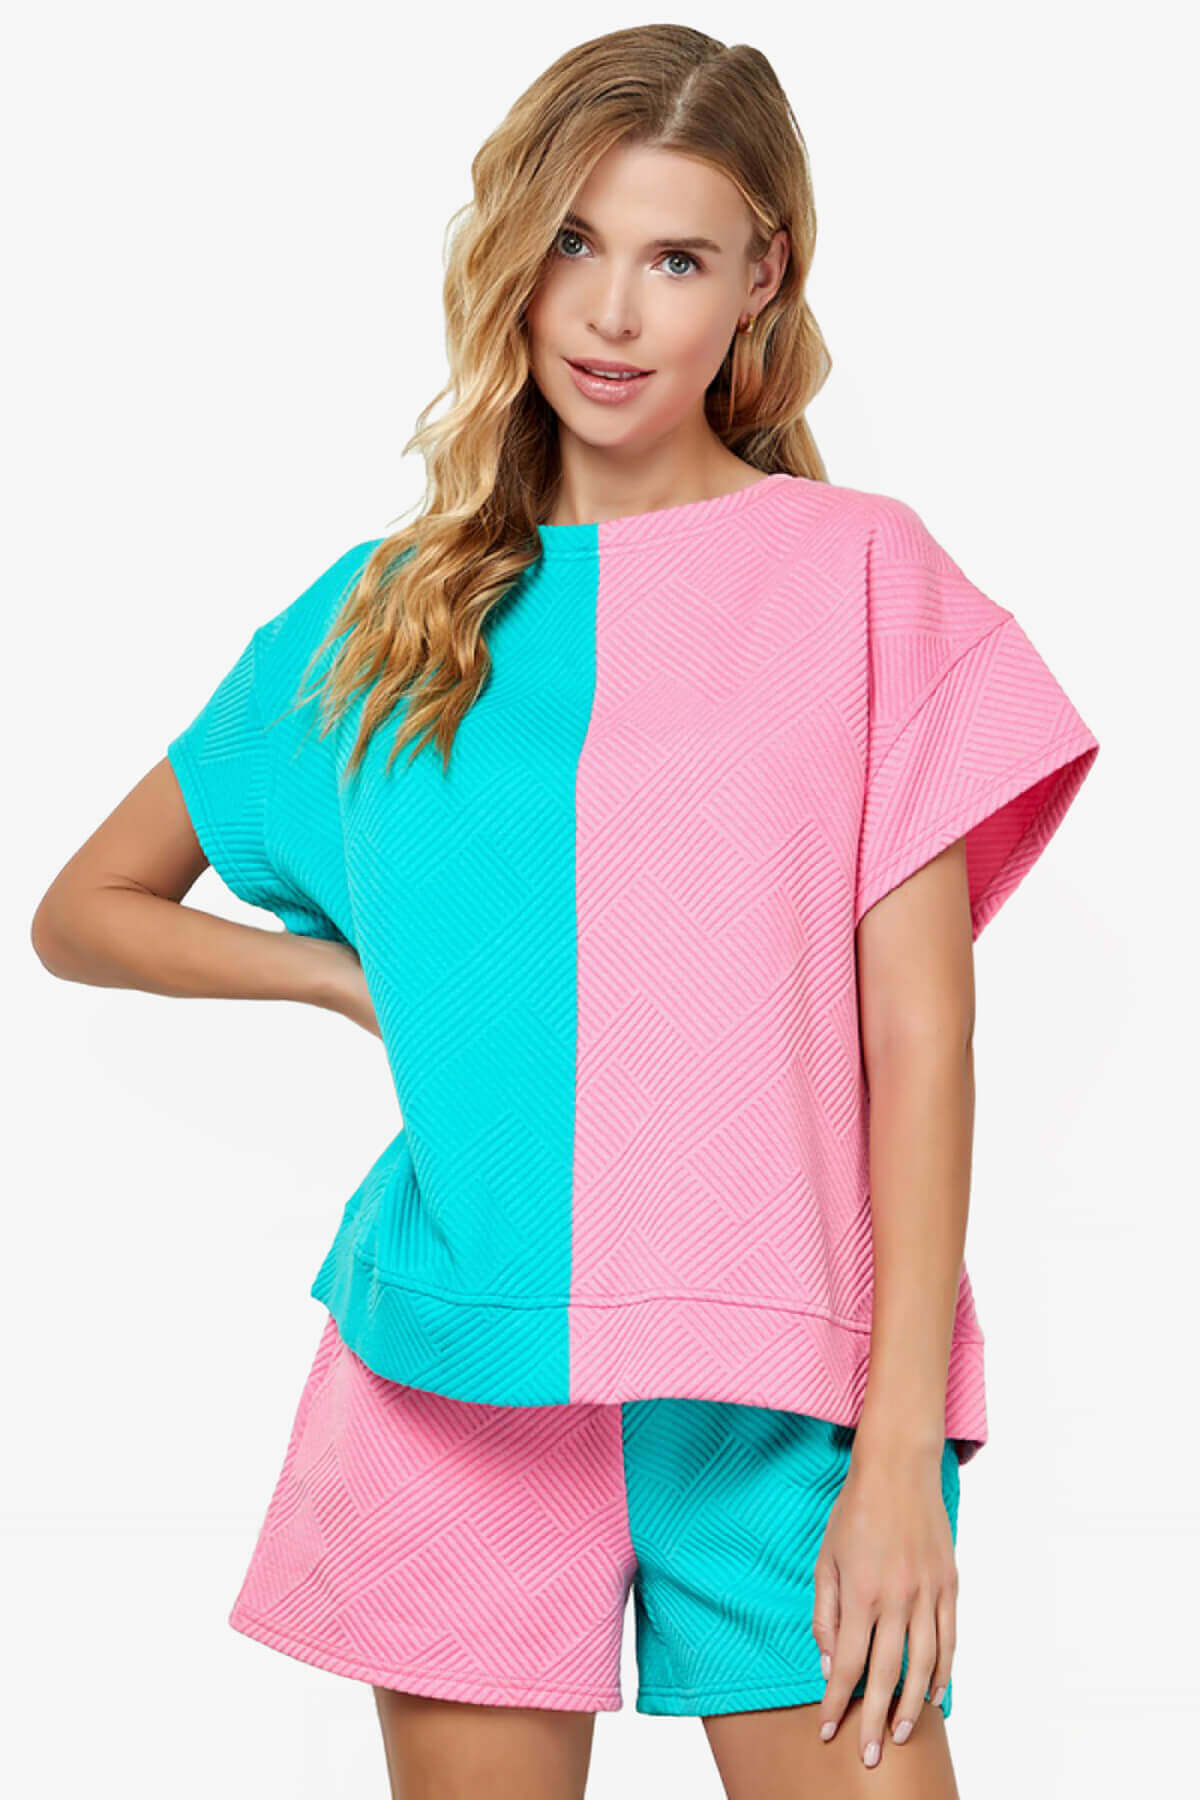 Lassy Textured Colorblock Short Sleeve Top PINK AND BLUE_5